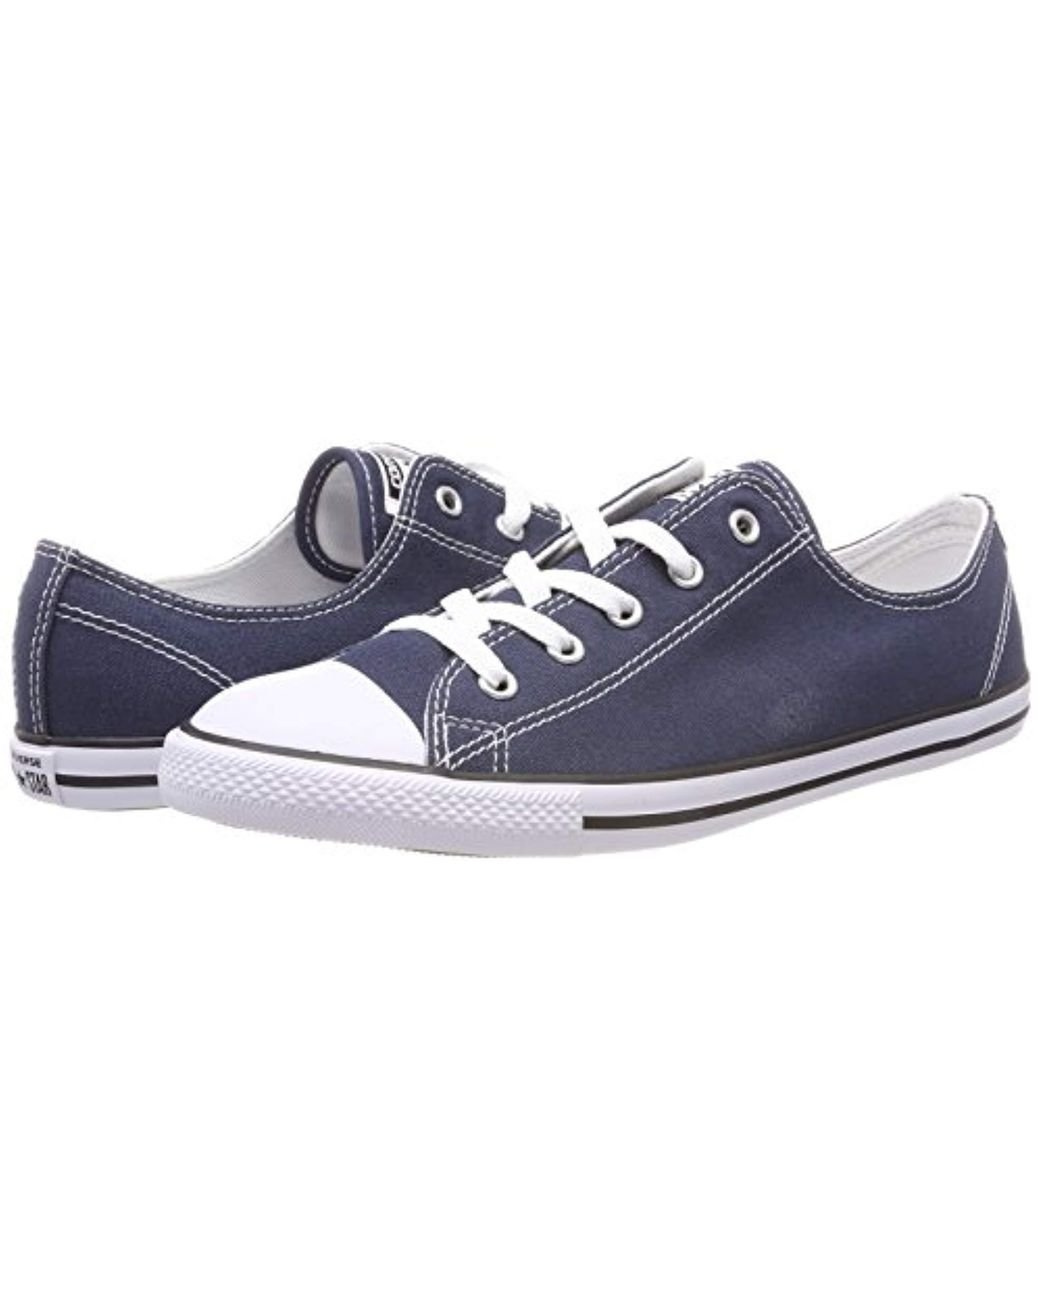 Converse Rubber 's As As Dainty Ox Trainers in Navy Blue (Blue) | Lyst